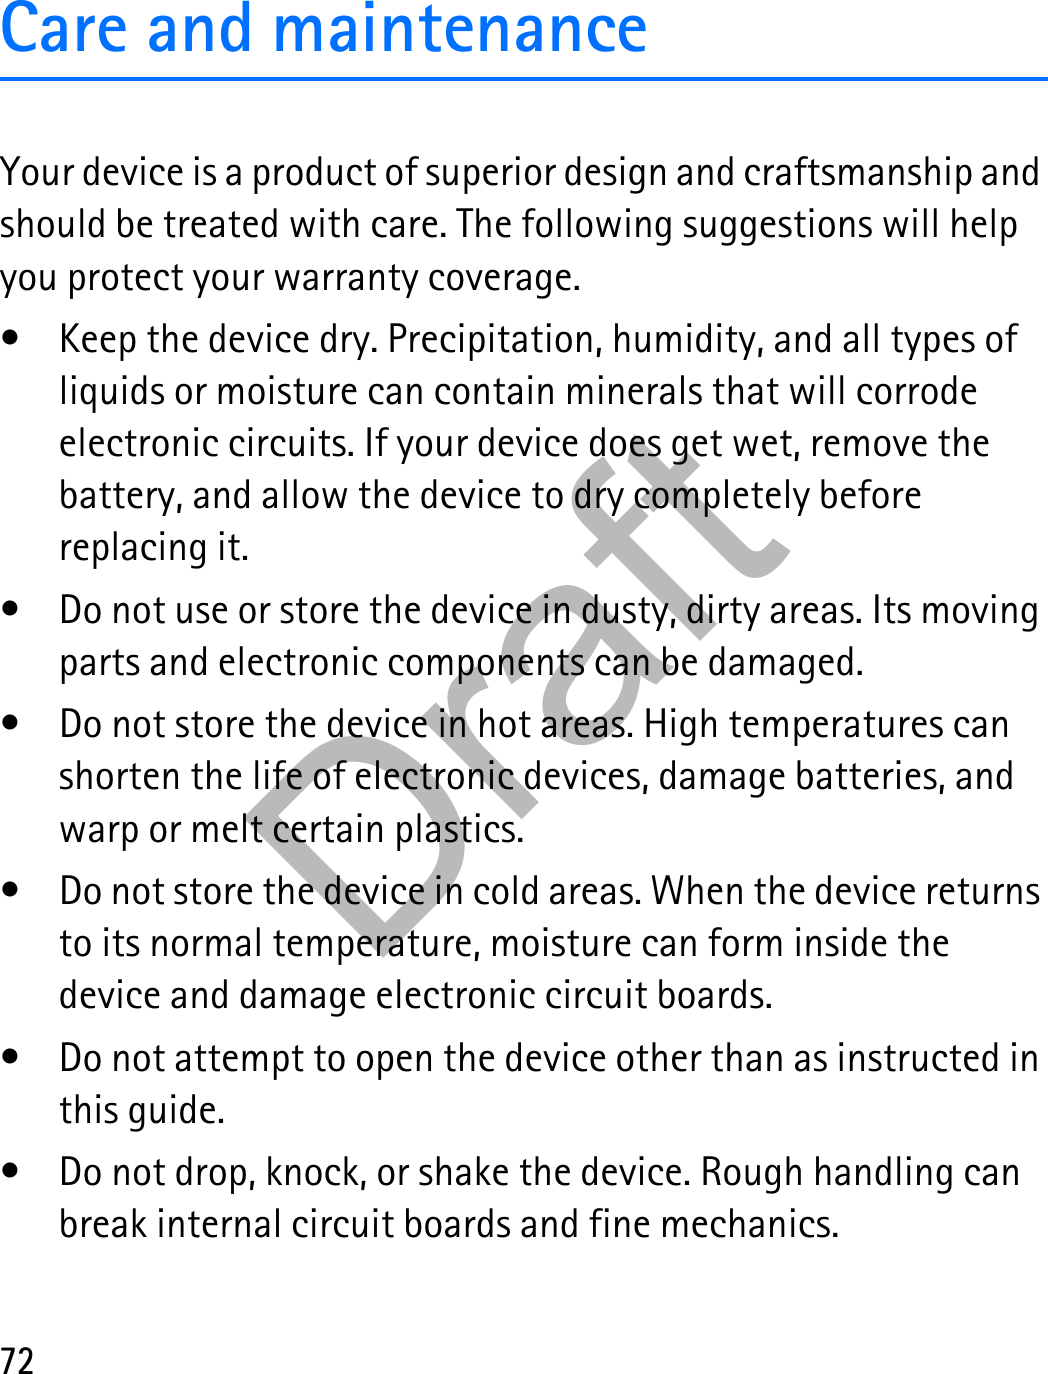 72Care and maintenanceYour device is a product of superior design and craftsmanship and should be treated with care. The following suggestions will help you protect your warranty coverage.• Keep the device dry. Precipitation, humidity, and all types of liquids or moisture can contain minerals that will corrode electronic circuits. If your device does get wet, remove the battery, and allow the device to dry completely before replacing it.• Do not use or store the device in dusty, dirty areas. Its moving parts and electronic components can be damaged.• Do not store the device in hot areas. High temperatures can shorten the life of electronic devices, damage batteries, and warp or melt certain plastics.• Do not store the device in cold areas. When the device returns to its normal temperature, moisture can form inside the device and damage electronic circuit boards.• Do not attempt to open the device other than as instructed in this guide.• Do not drop, knock, or shake the device. Rough handling can break internal circuit boards and fine mechanics.Draft